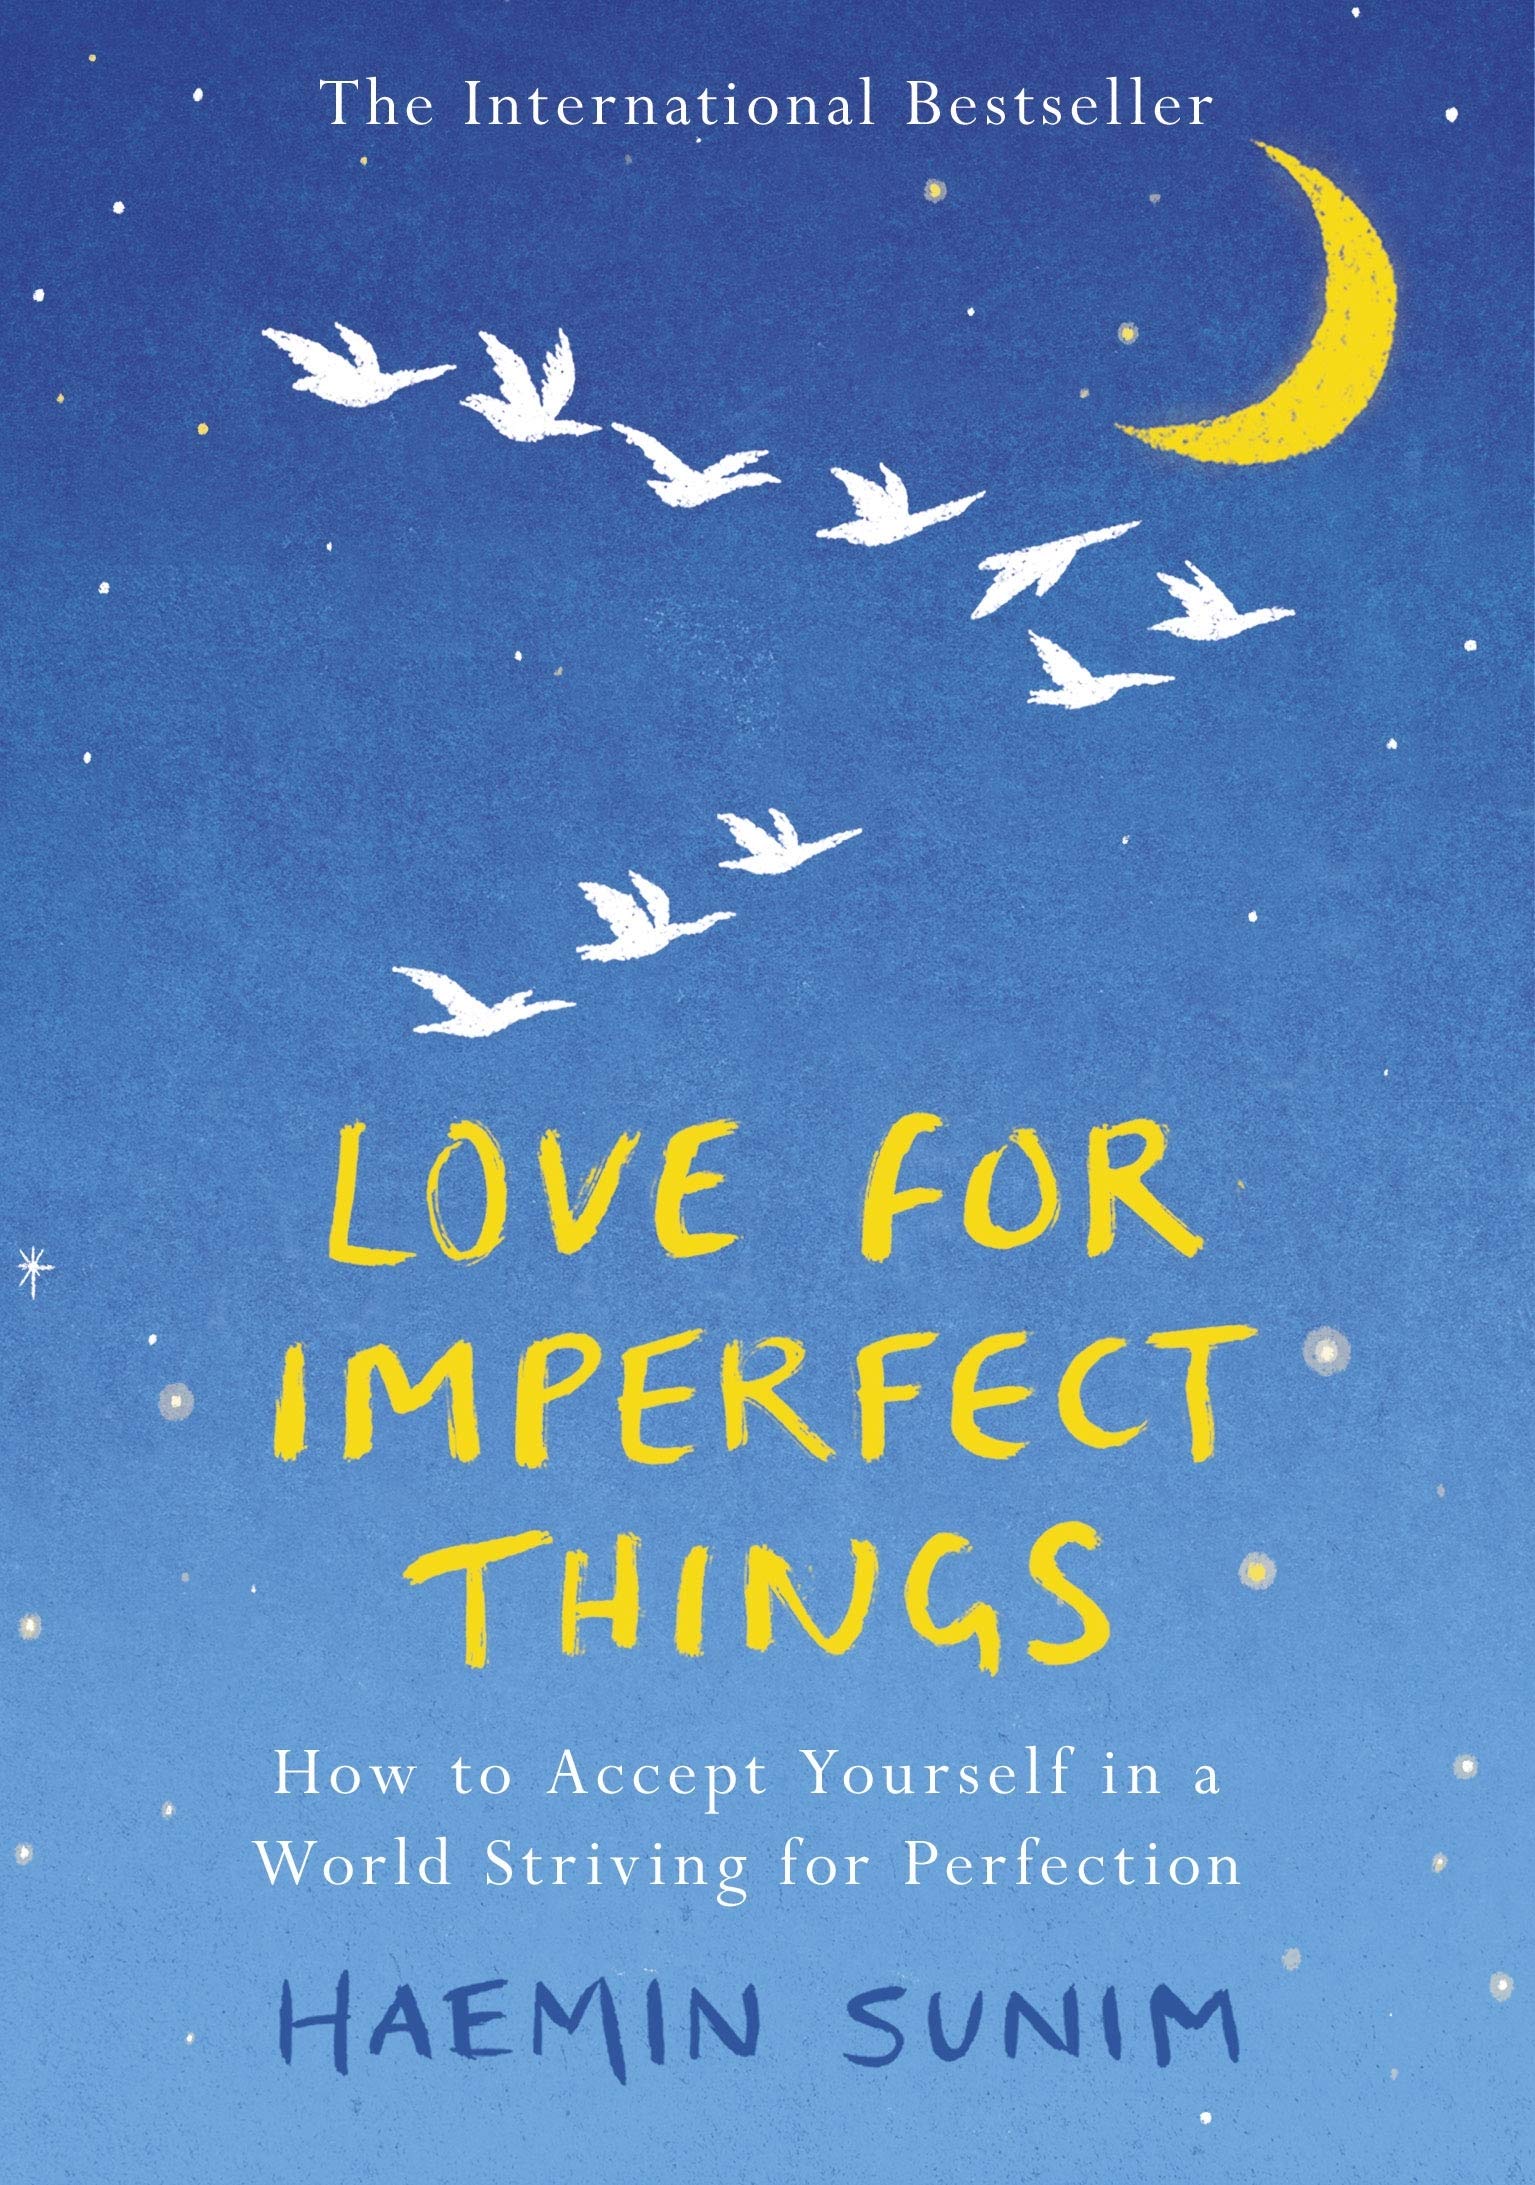 Love for Imperfect Things | Haemin Sunim 